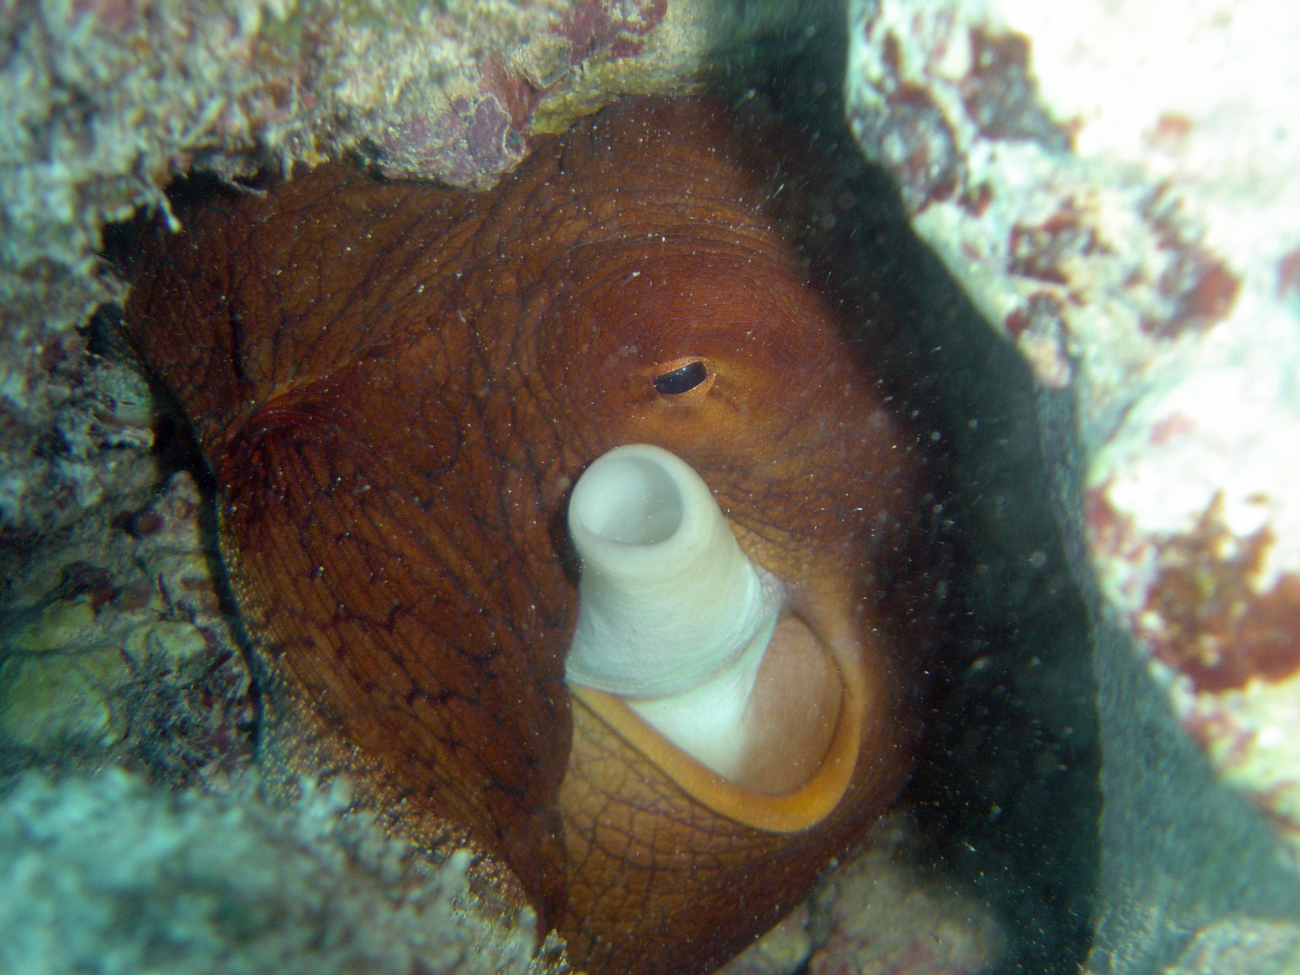 A large red octopus